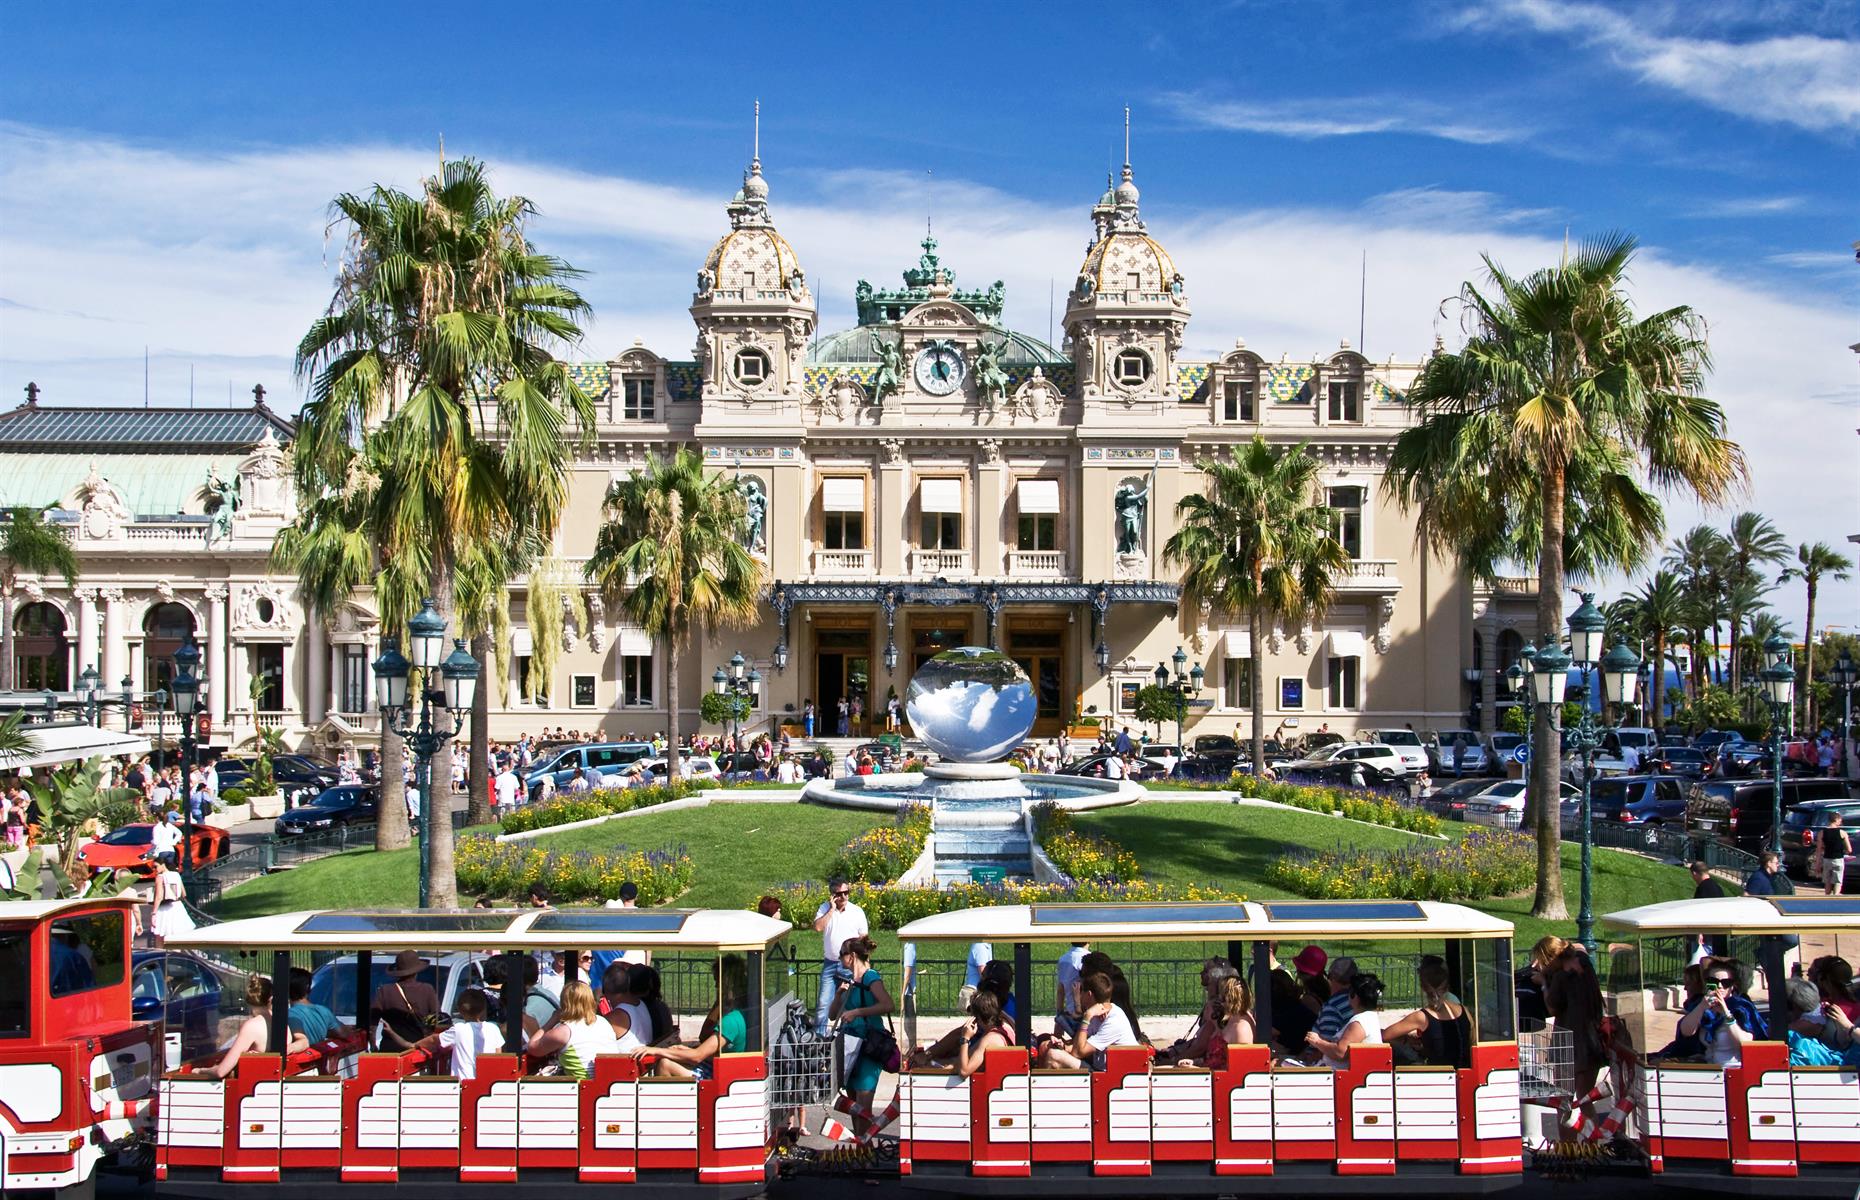 <p>One of the smallest countries in Europe – as well as one of the richest in terms of GDP per capita – Monaco welcomes up to 20 million visitors a year, dwarfing the city-state's domestic population of around 36,000.</p>  <p>So-called Monégasque passports might be comparatively rare due to the country's small number of inhabitants, but they're among the most powerful in the world, offering visa-free entry to 178 destinations.</p>